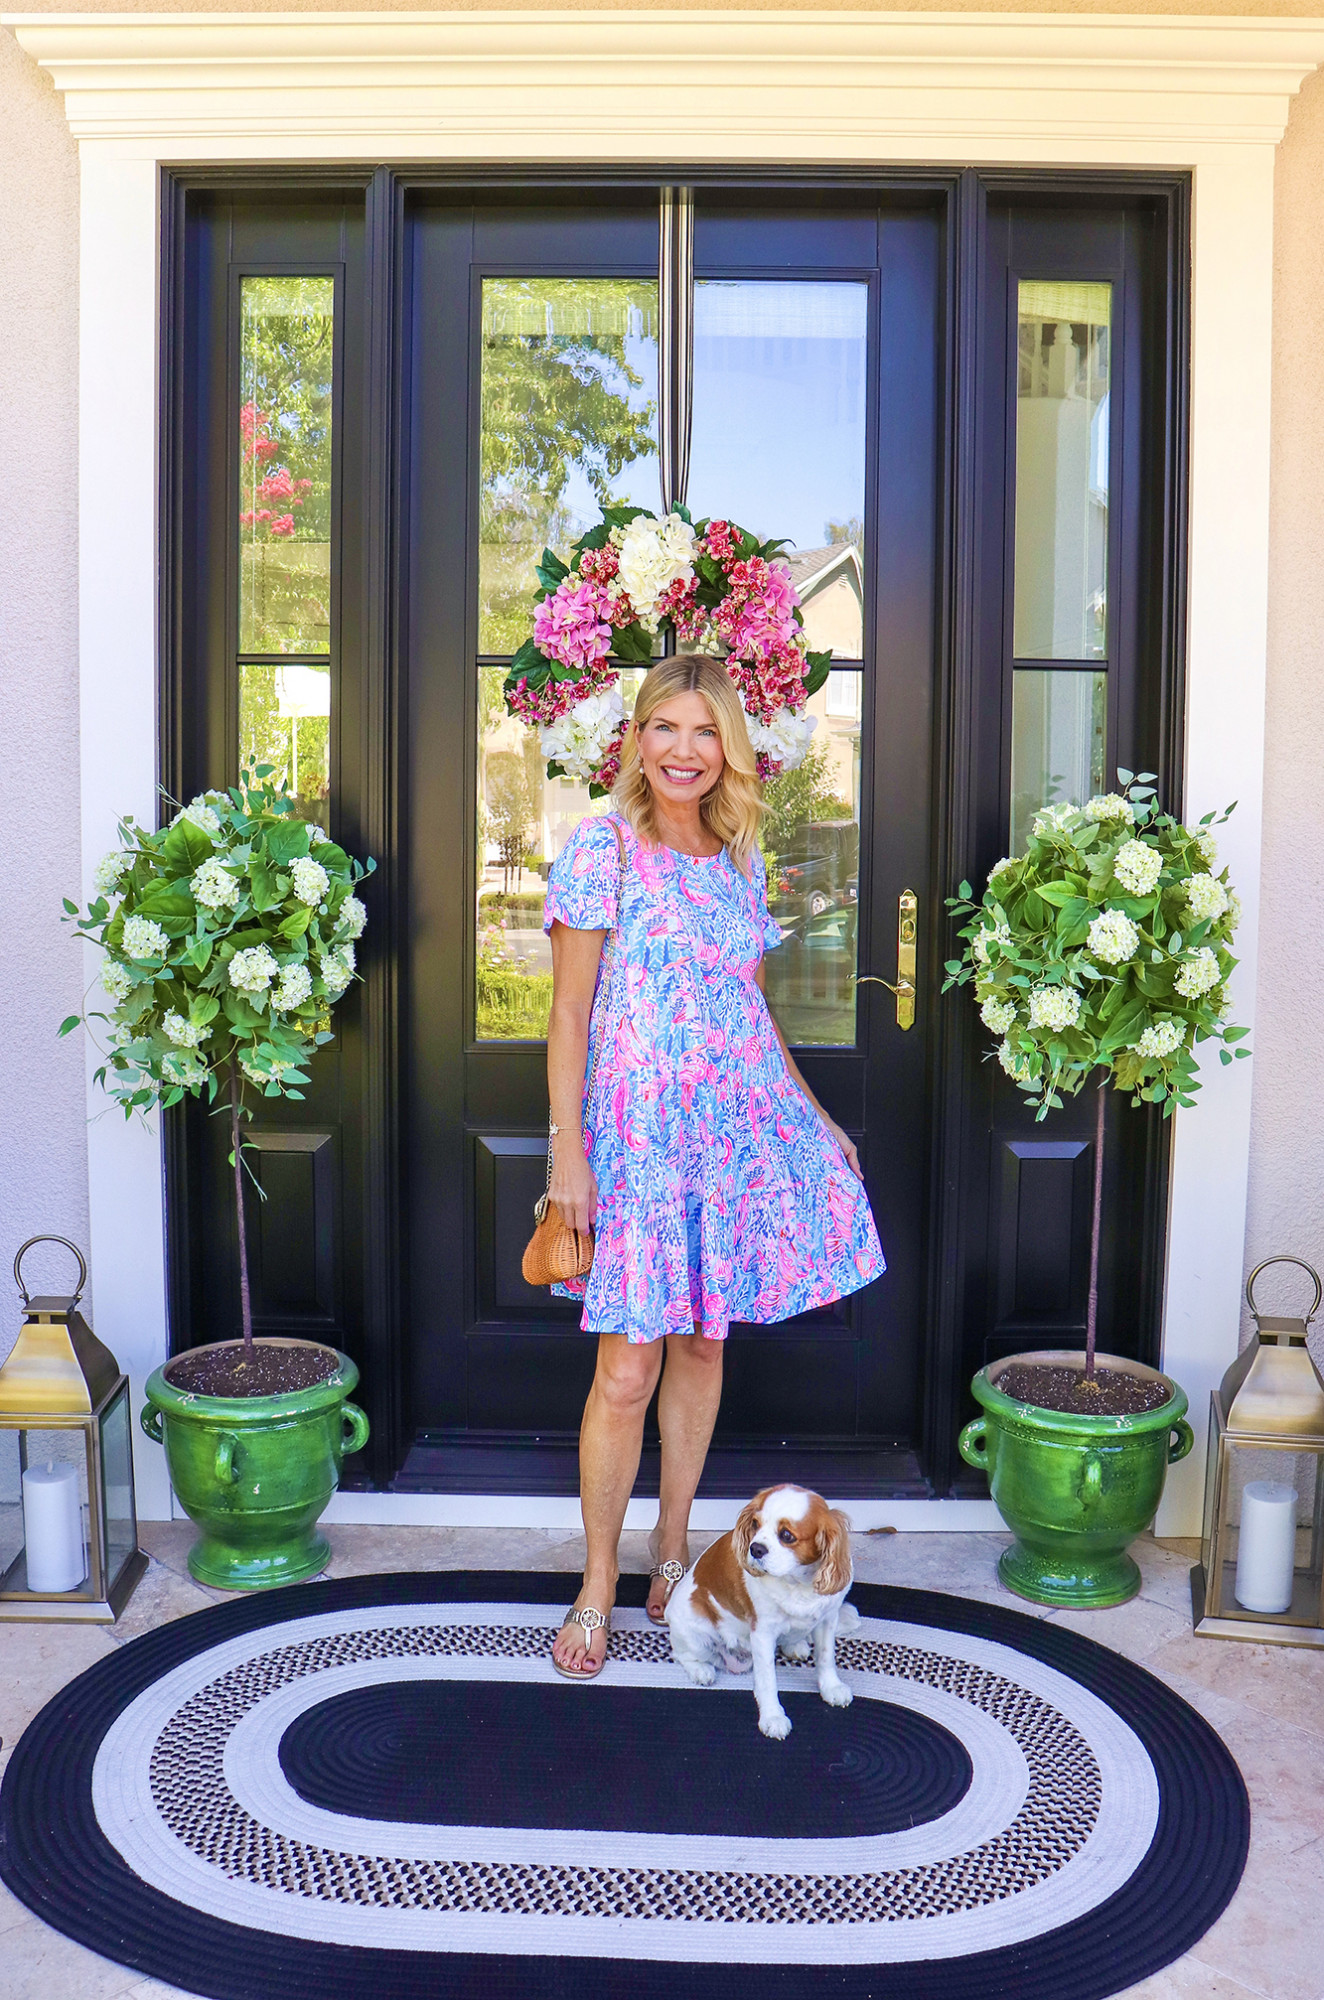 New Lilly Pulitzer Dresses - Summer knit options that are affordable & classy. New alpha style of sizing so it's so easy to order! $98-$118 options. 